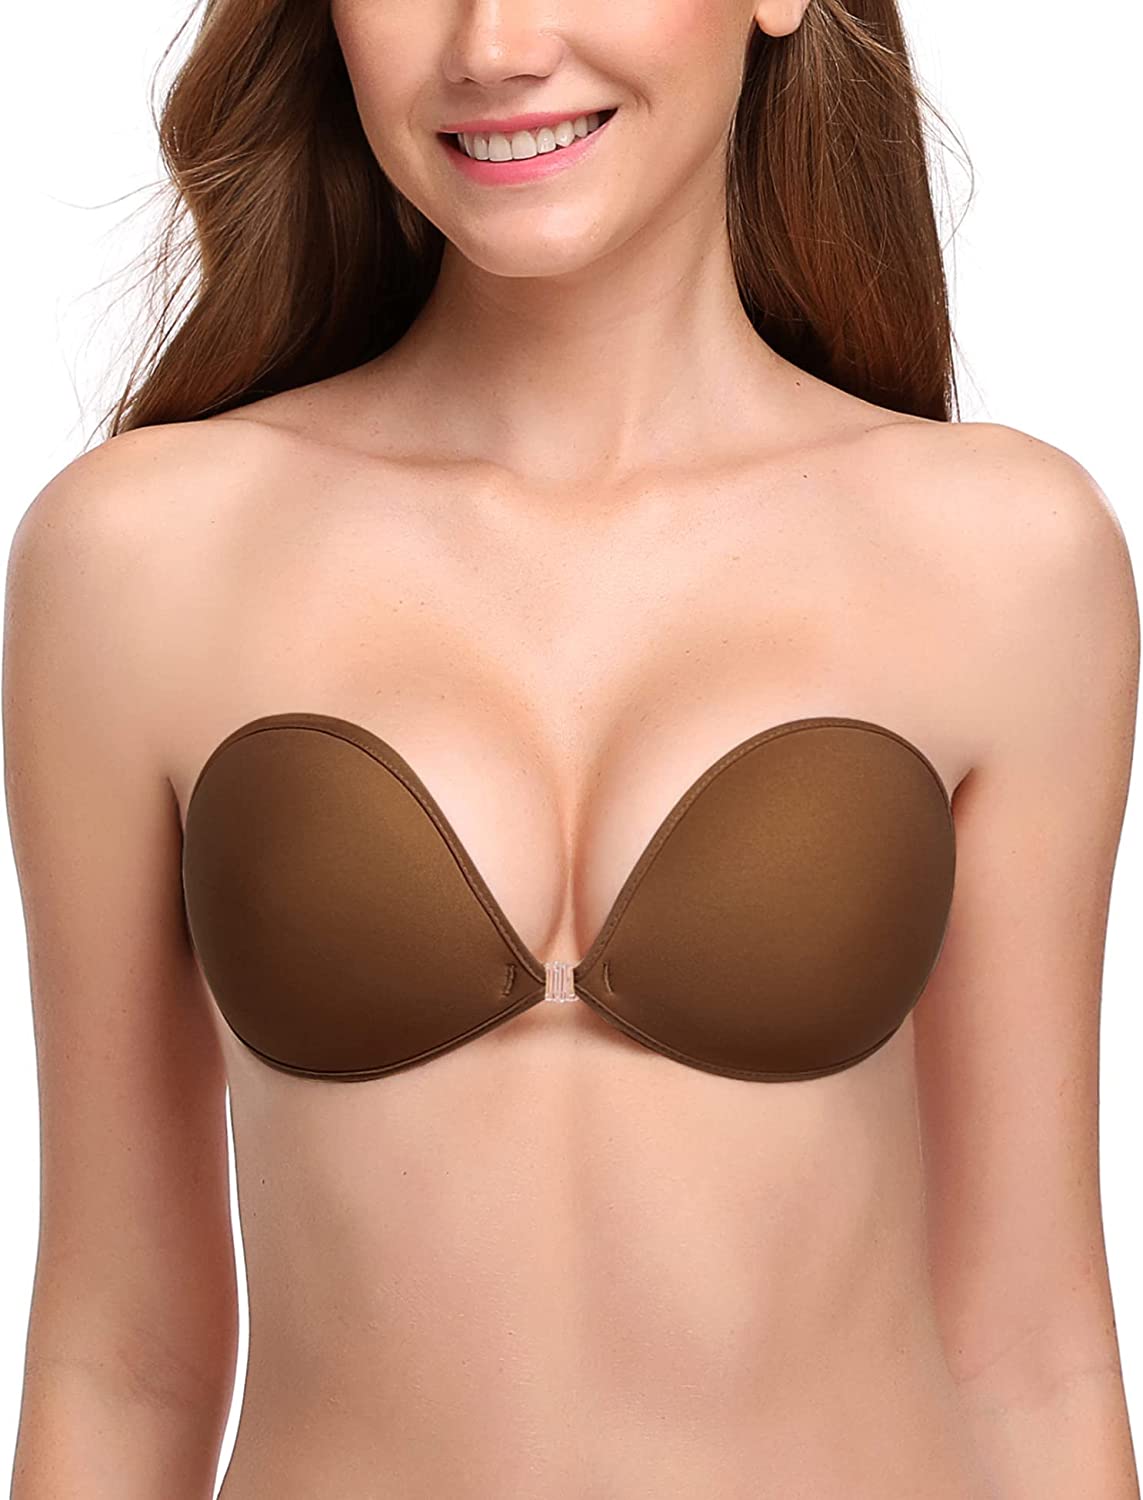 Adhesive Bra, Silicone Sticky Strapless Bra Reusable Invisible